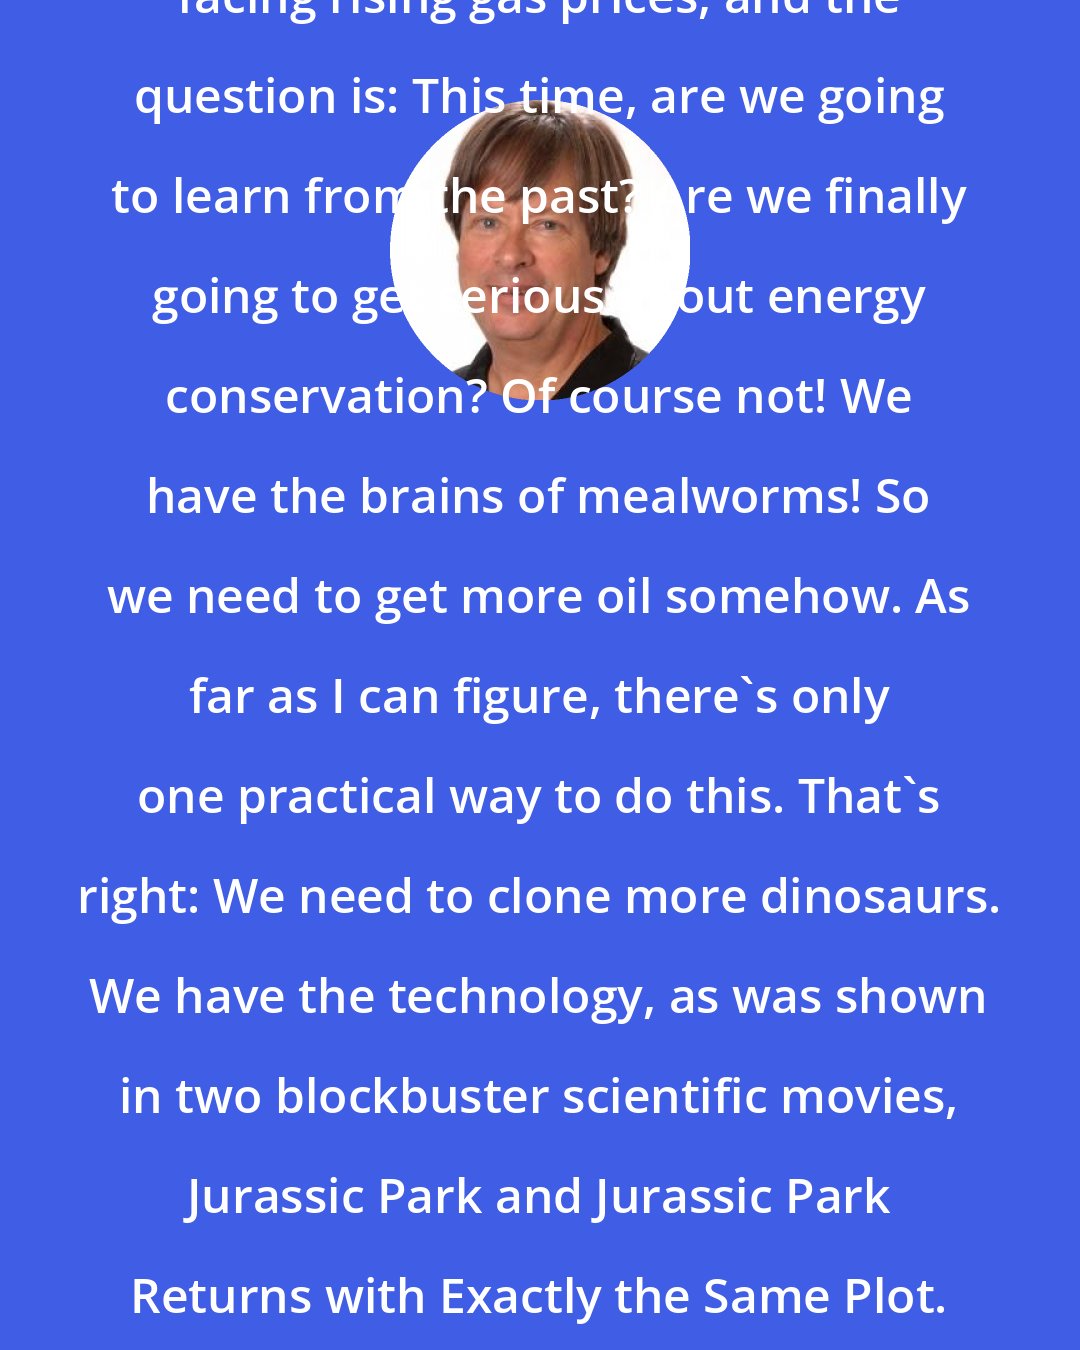 Dave Barry: Now, once again, we find ourselves facing rising gas prices, and the question is: This time, are we going to learn from the past? Are we finally going to get serious about energy conservation? Of course not! We have the brains of mealworms! So we need to get more oil somehow. As far as I can figure, there's only one practical way to do this. That's right: We need to clone more dinosaurs. We have the technology, as was shown in two blockbuster scientific movies, Jurassic Park and Jurassic Park Returns with Exactly the Same Plot. Once we have the dinosaurs, all we need is an asteroid.